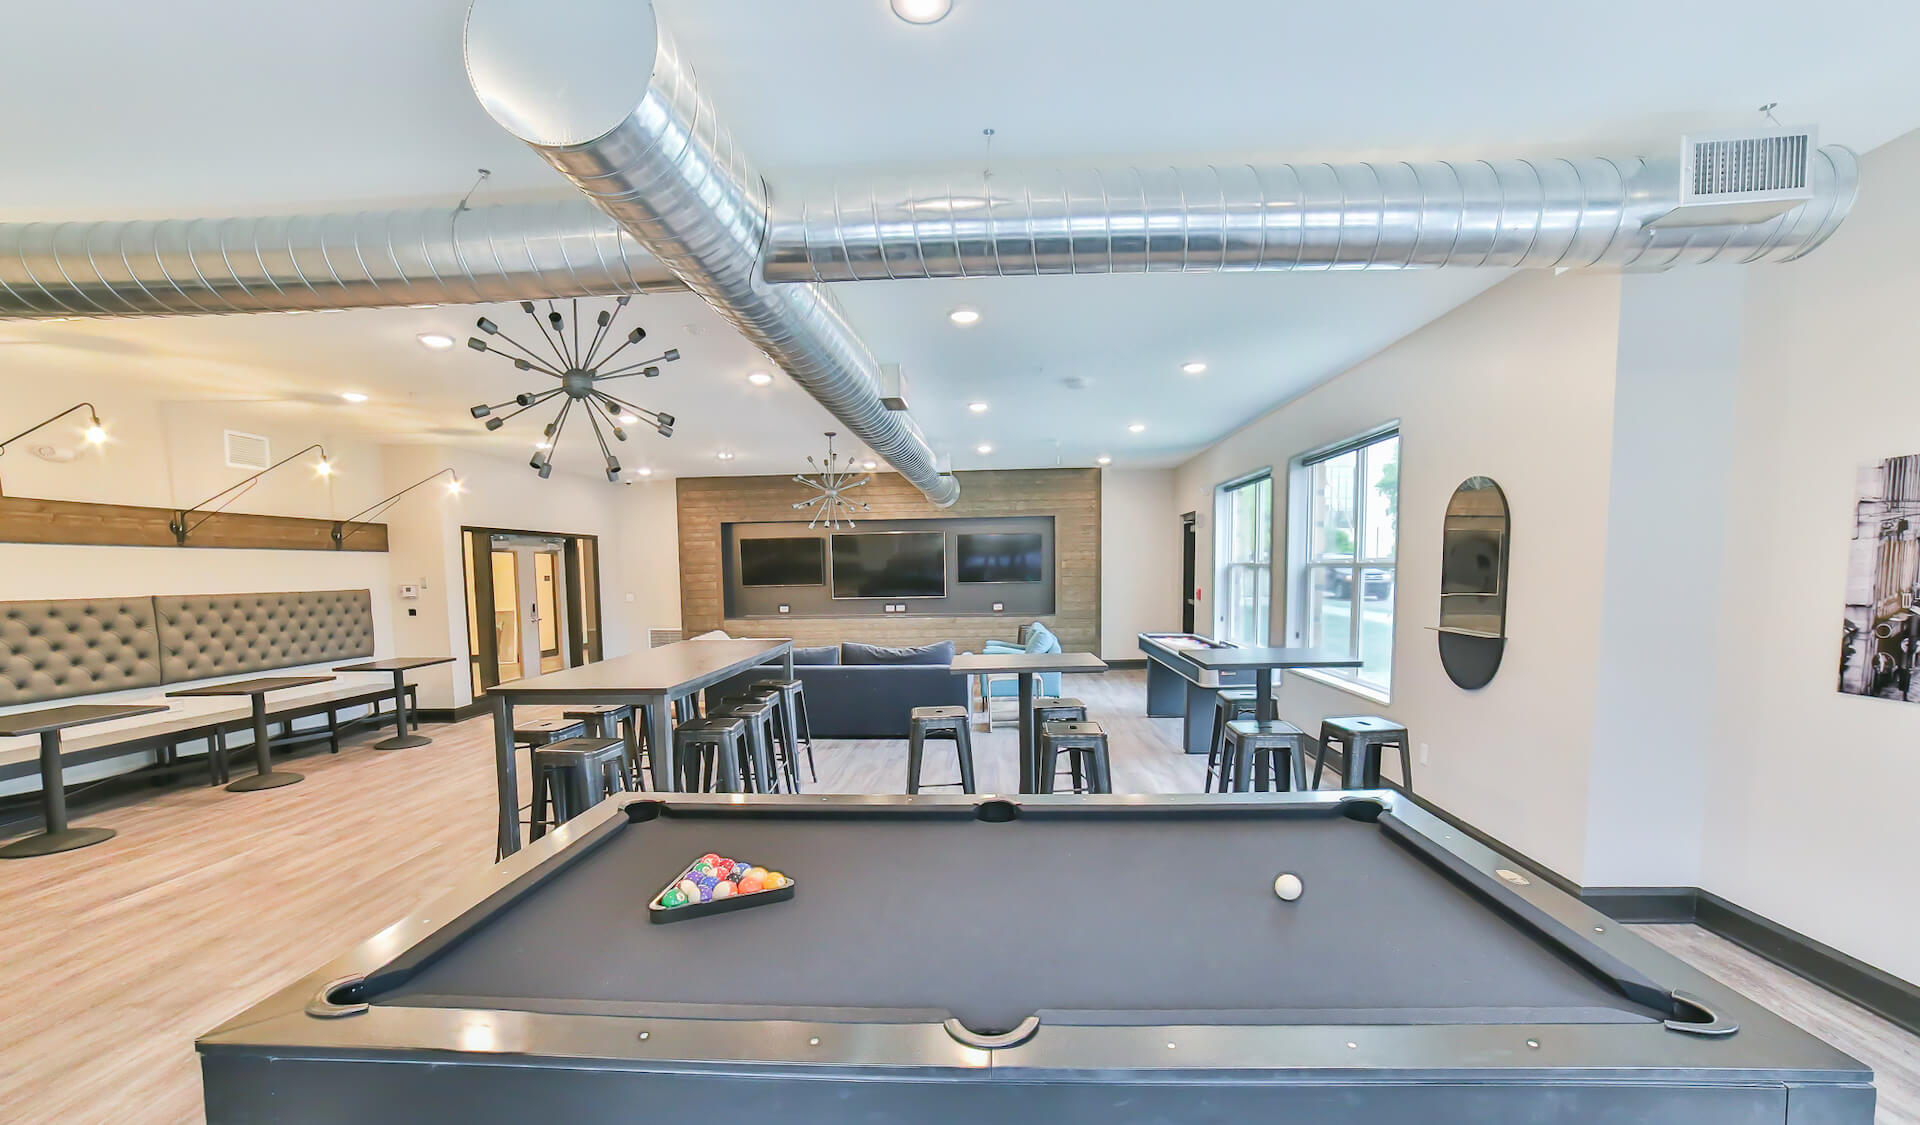 Community room with pool table and plenty of seating